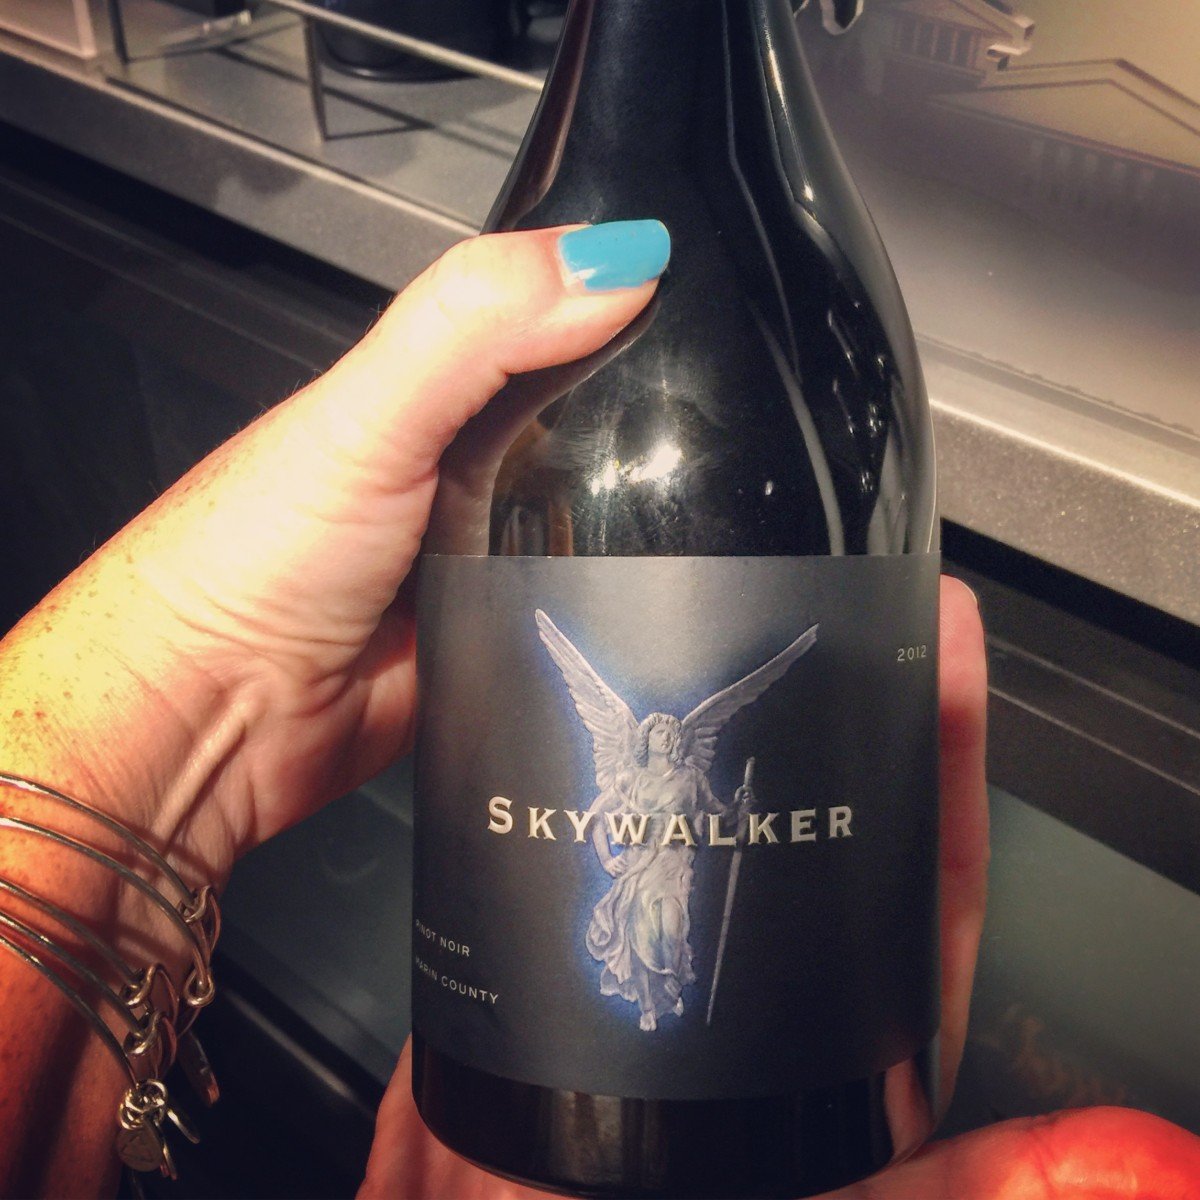 Skywalker Vineyards, Wine Now at the Star Wars Launch Bay